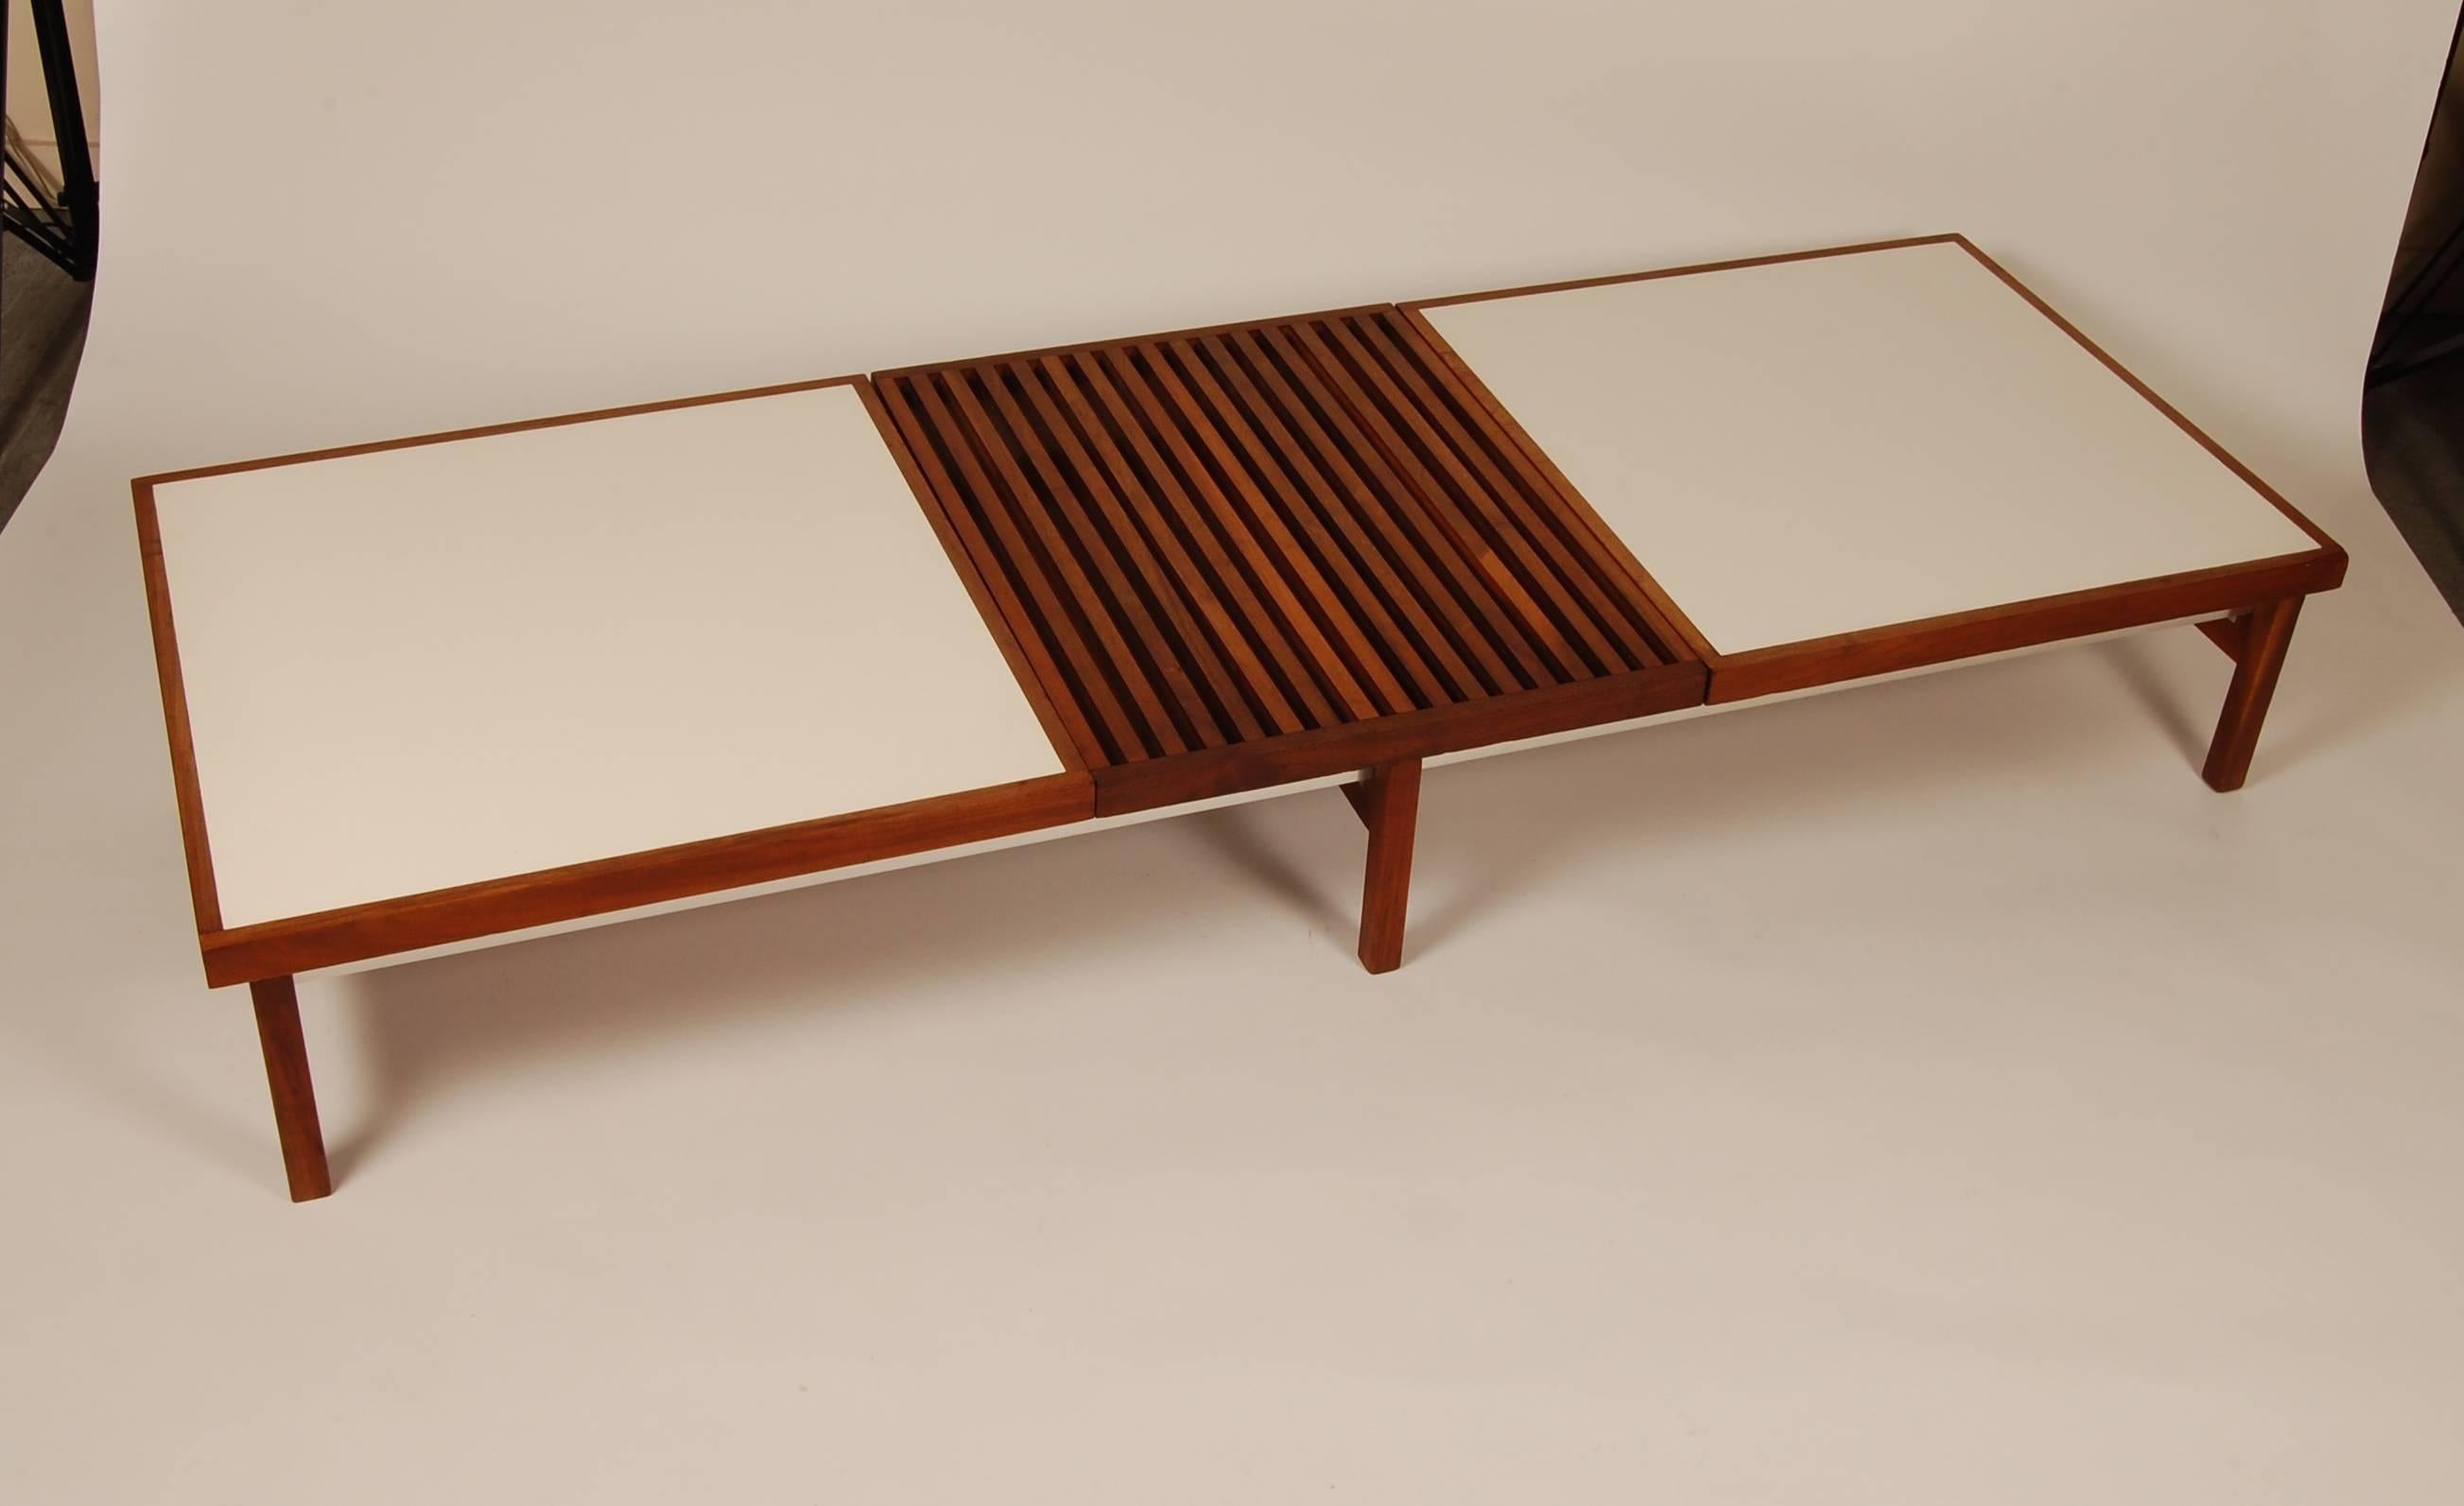 A very interesting modernist bench / coffee table with all the characteristics we like: Over-designed and over-crafted. The frame consists of two parallel milled aluminum L tracks supported by three sets of walnut legs attached via a series of